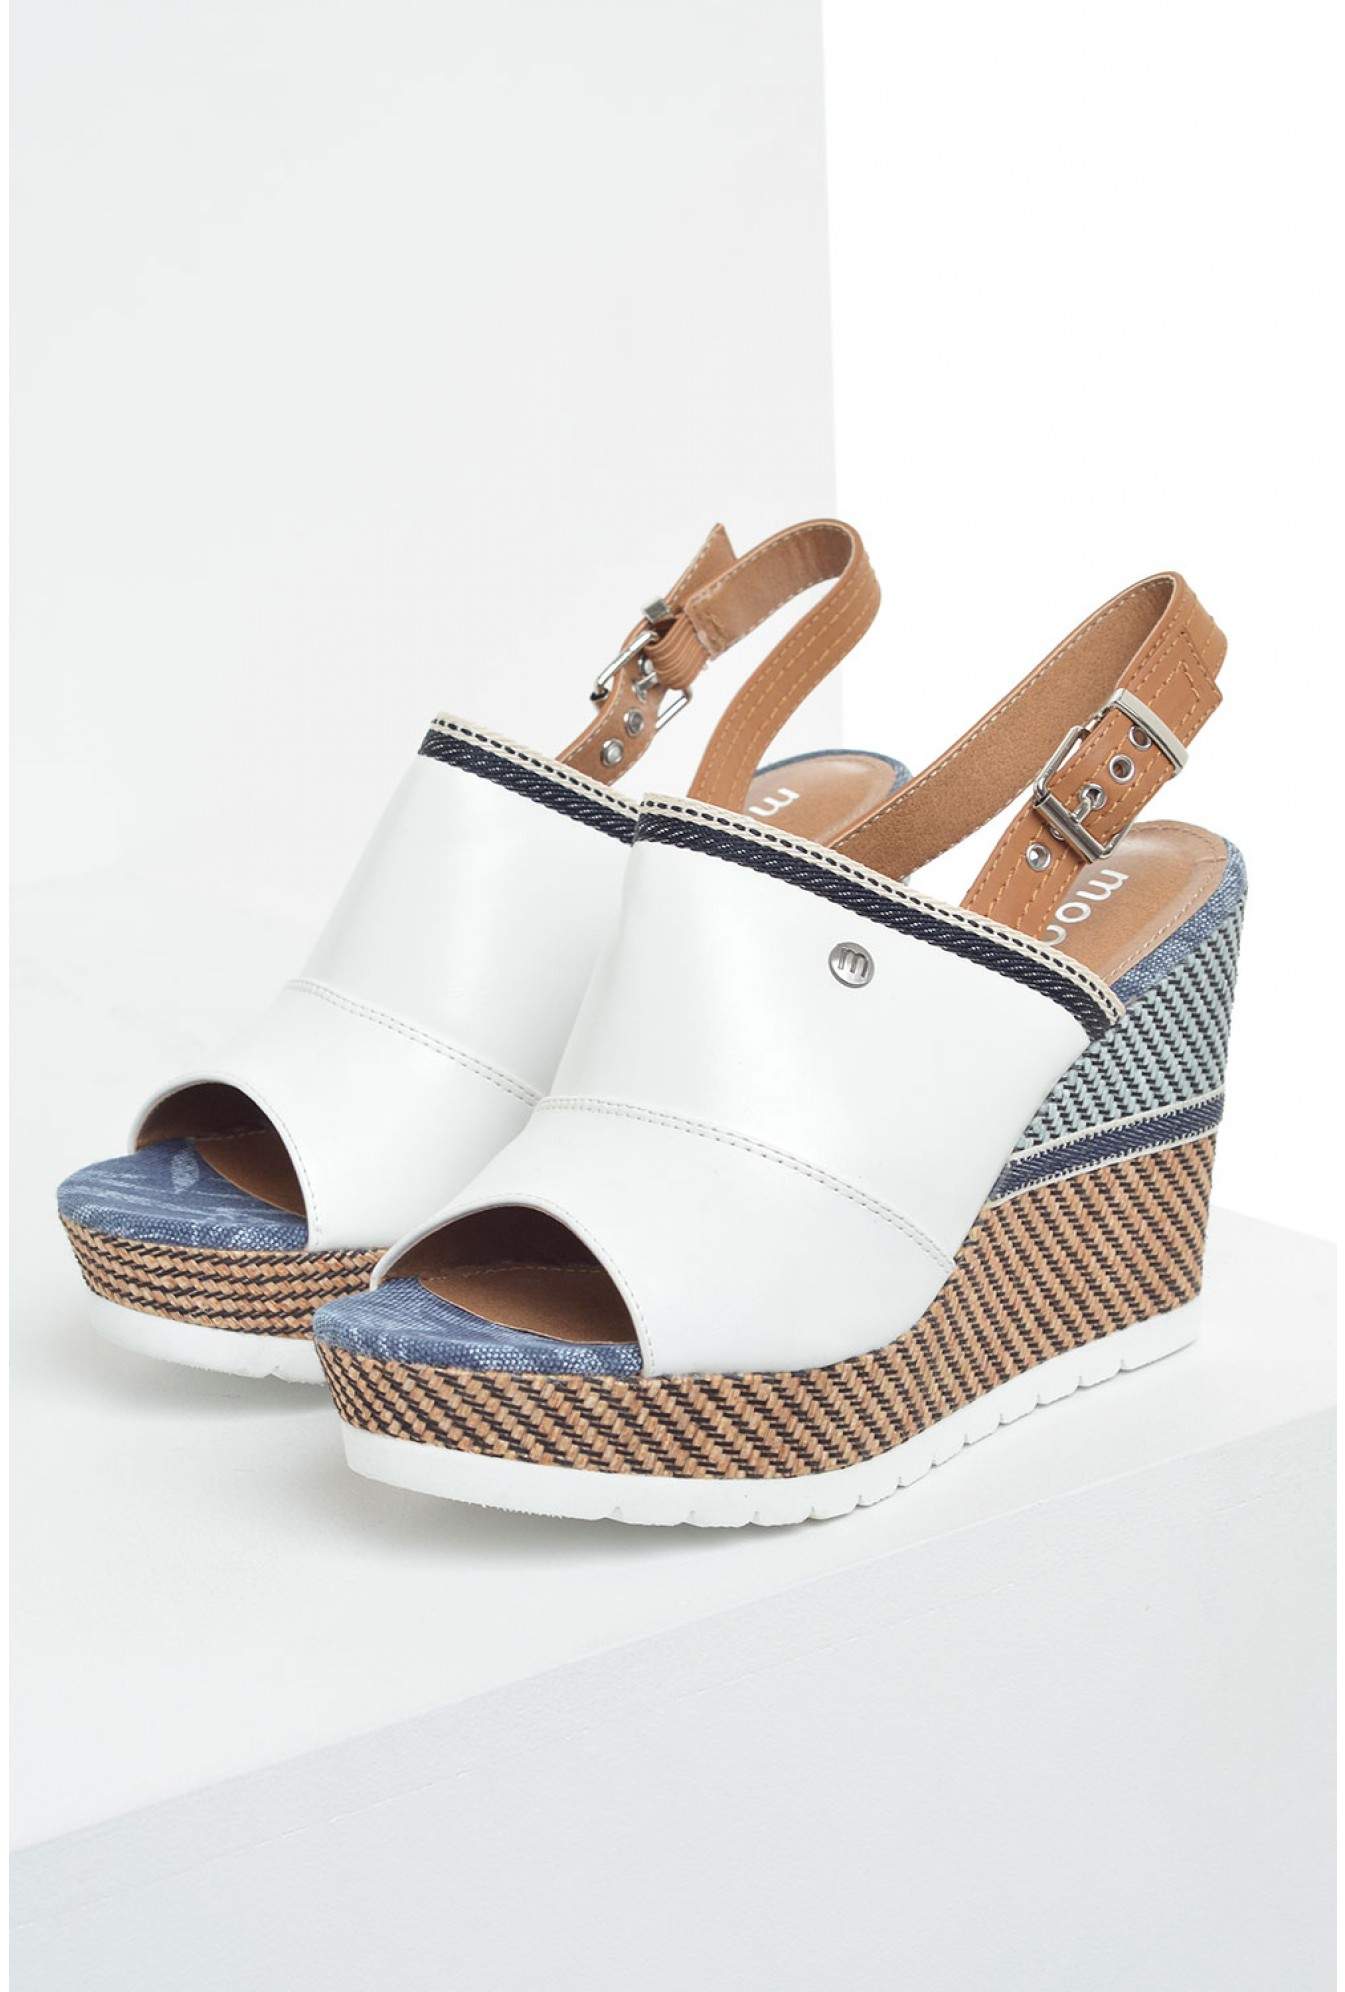 wedges with white sole